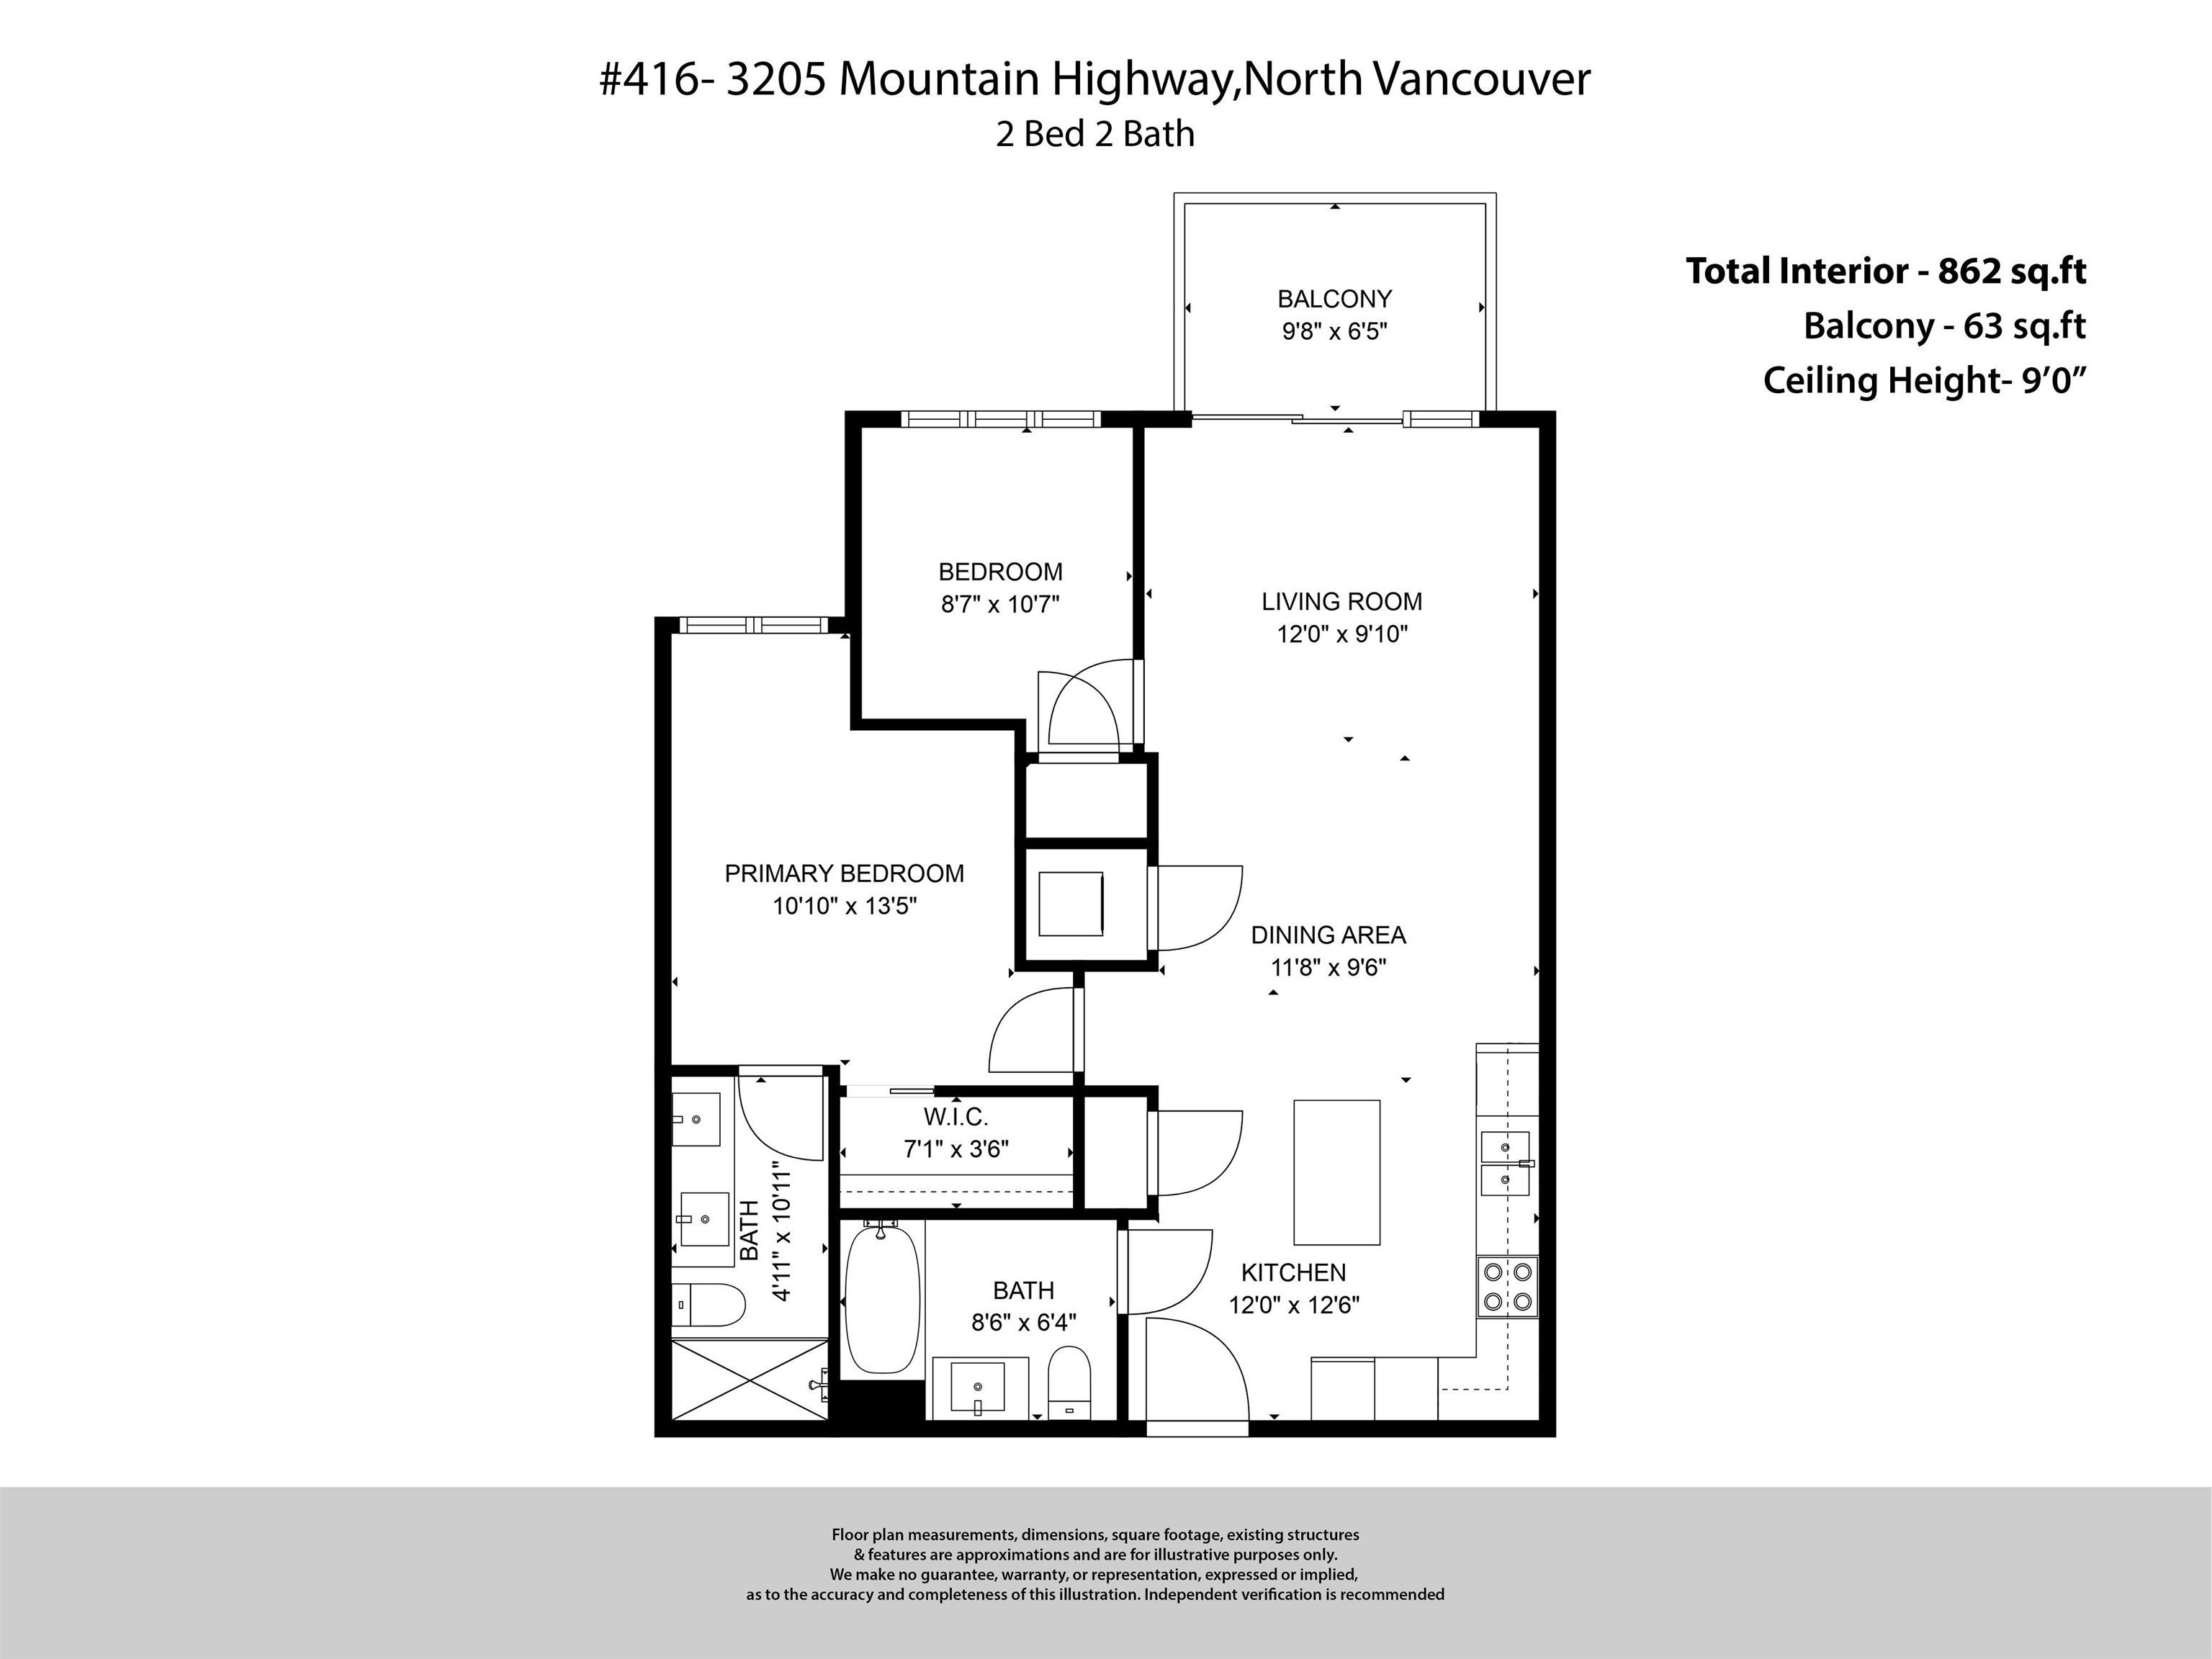 Listing image of 416 3205 MOUNTAIN HIGHWAY